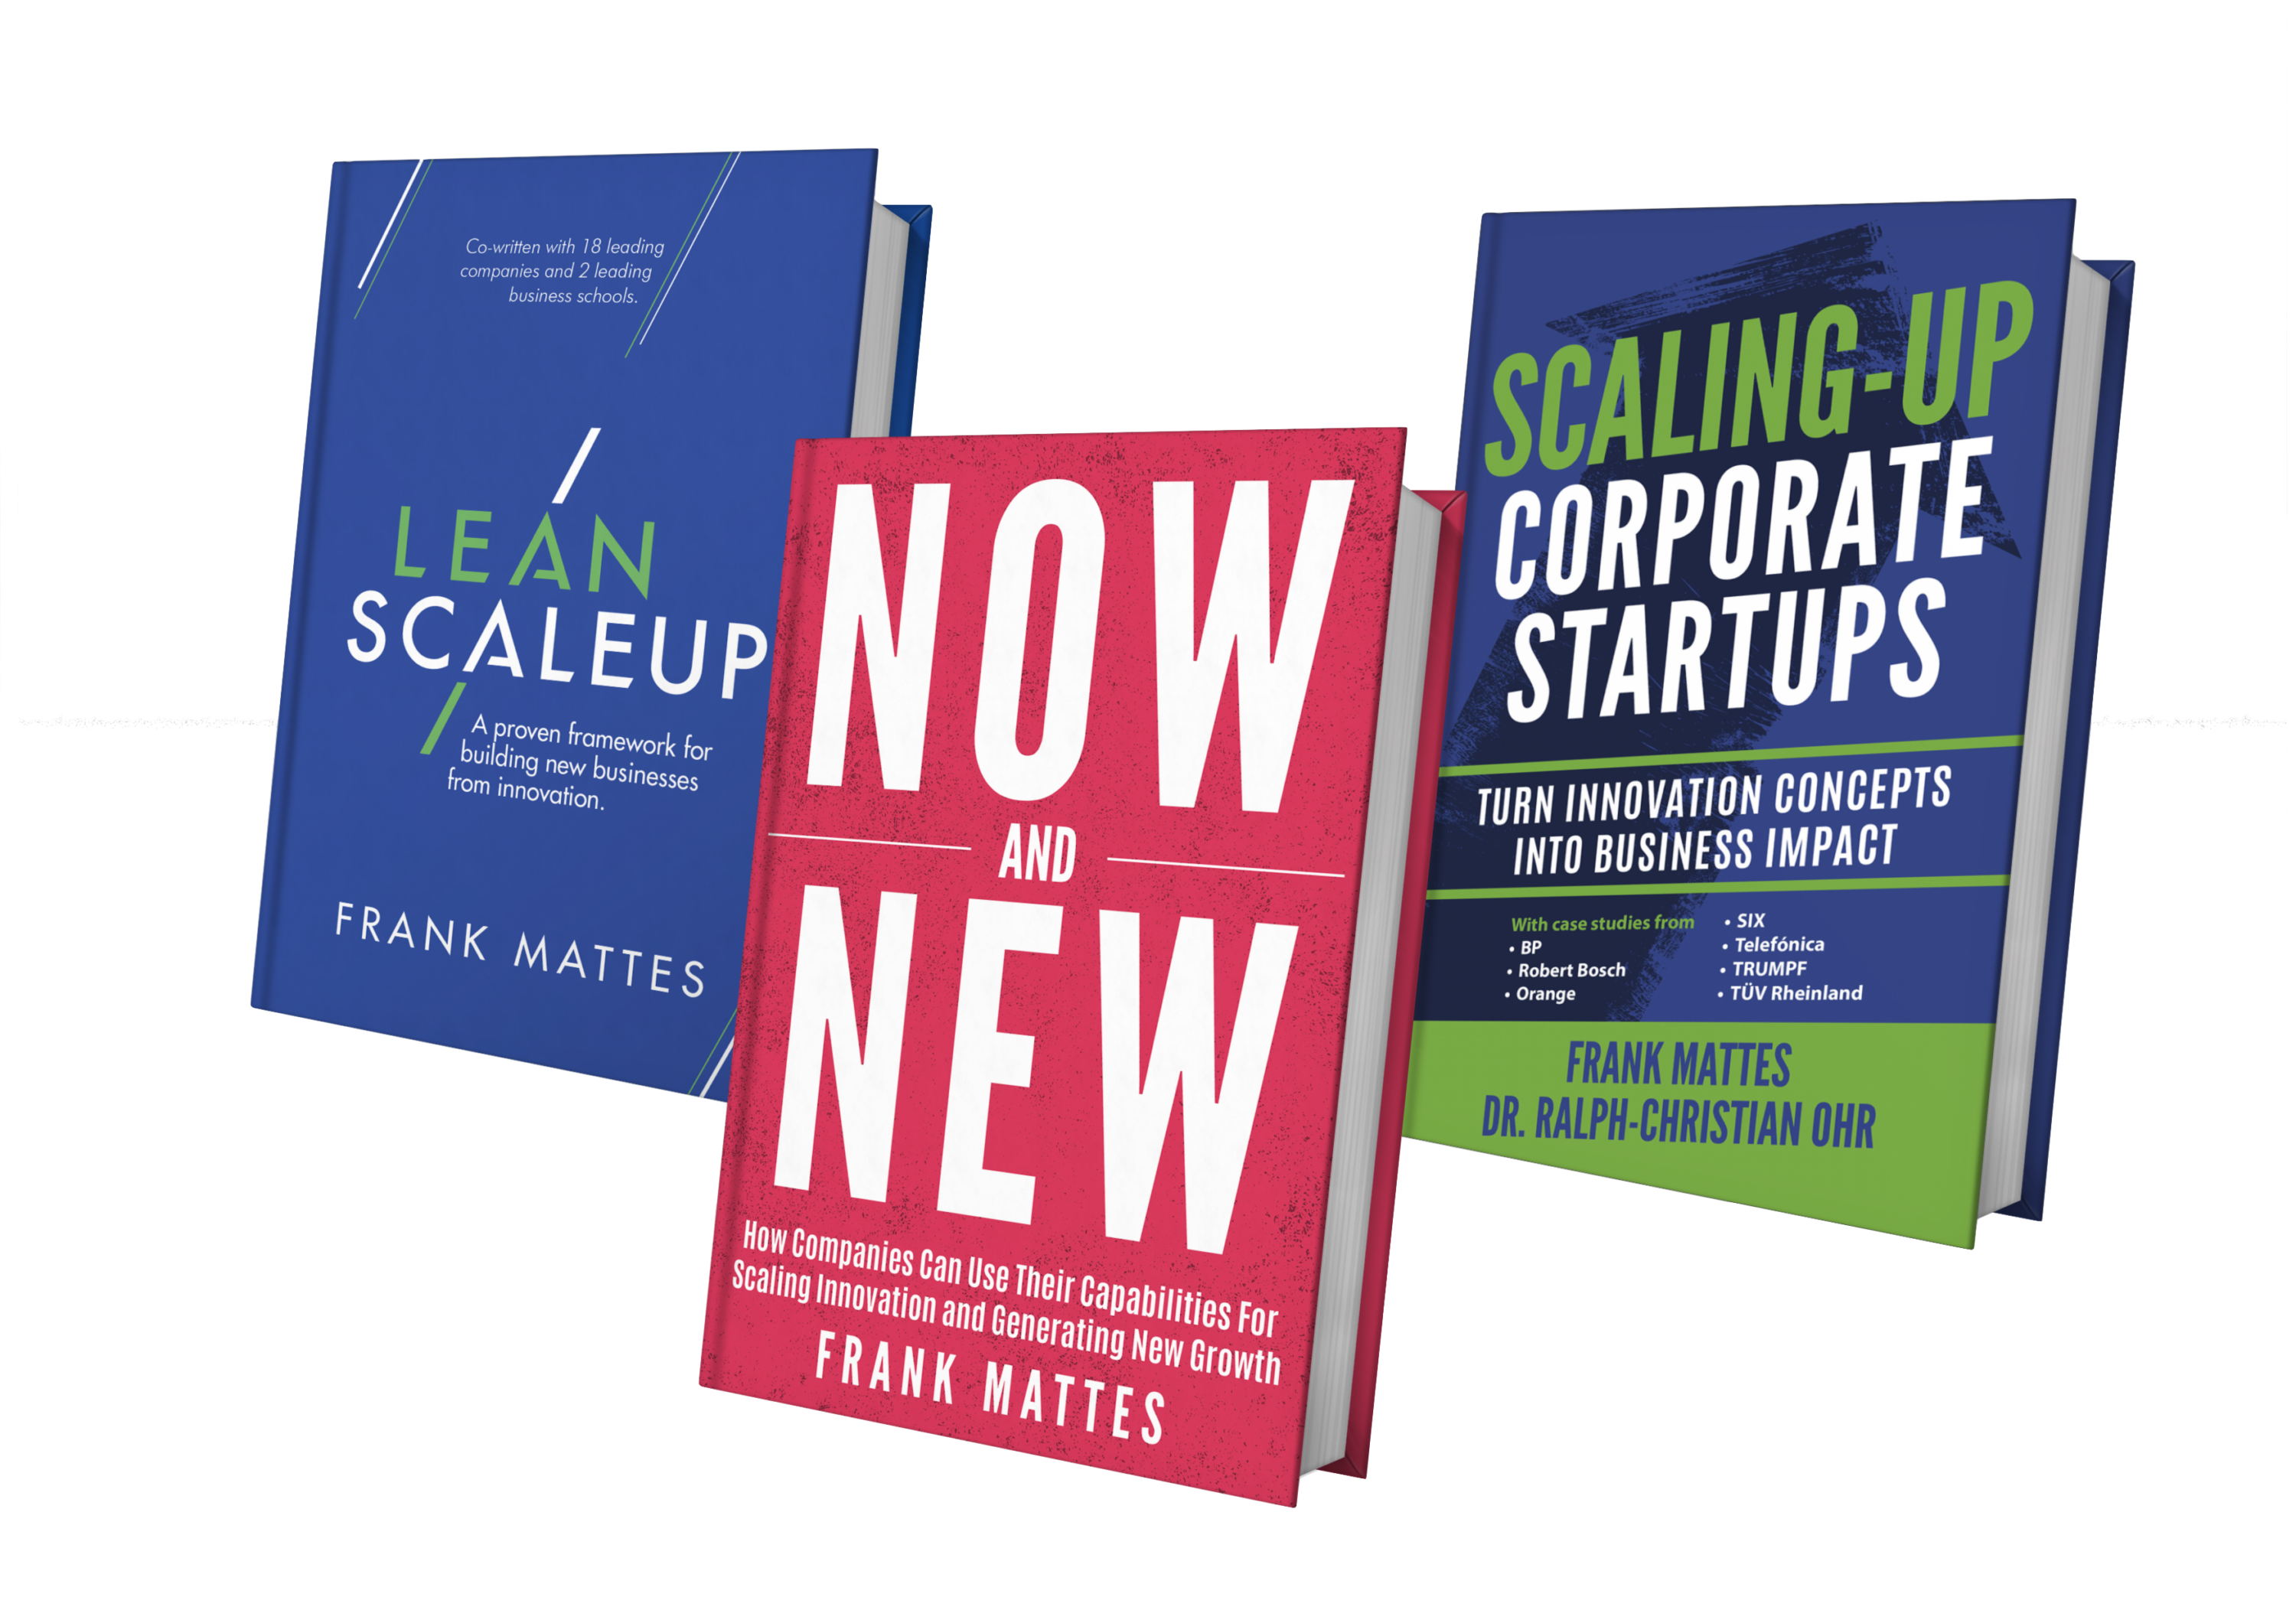 Three books by Frank Mattes: 'Lean Scaleup,' 'Now and New,' and 'Scaling-Up Corporate Startups,' displayed upright.